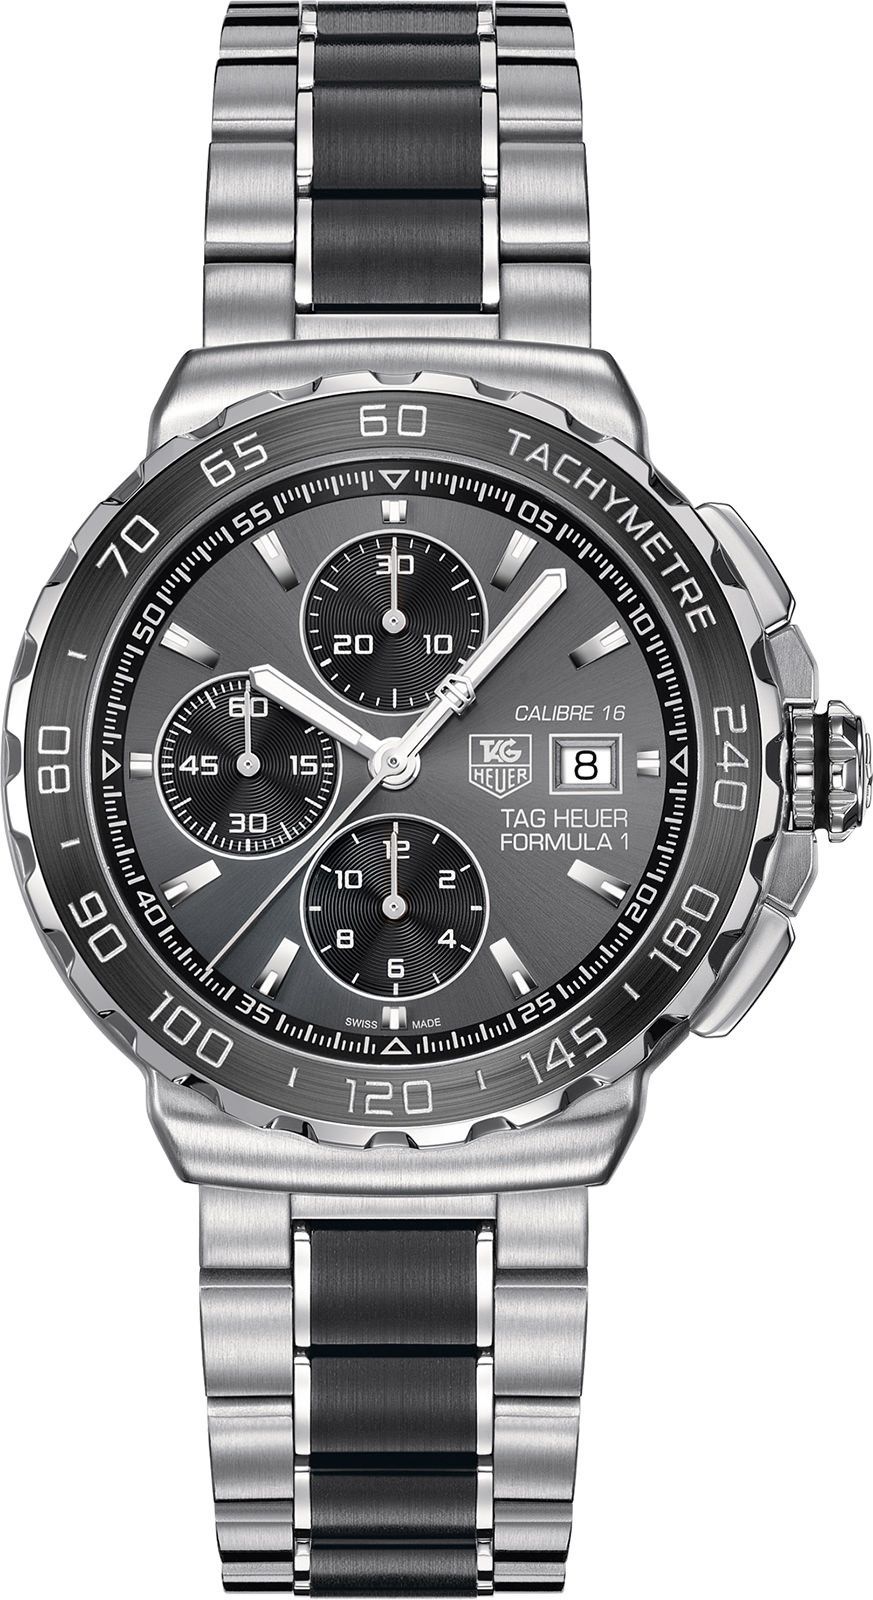 TAG Heuer Formula 1 Calibre 16 Grey Dial 44 mm Automatic Watch For Men - 1